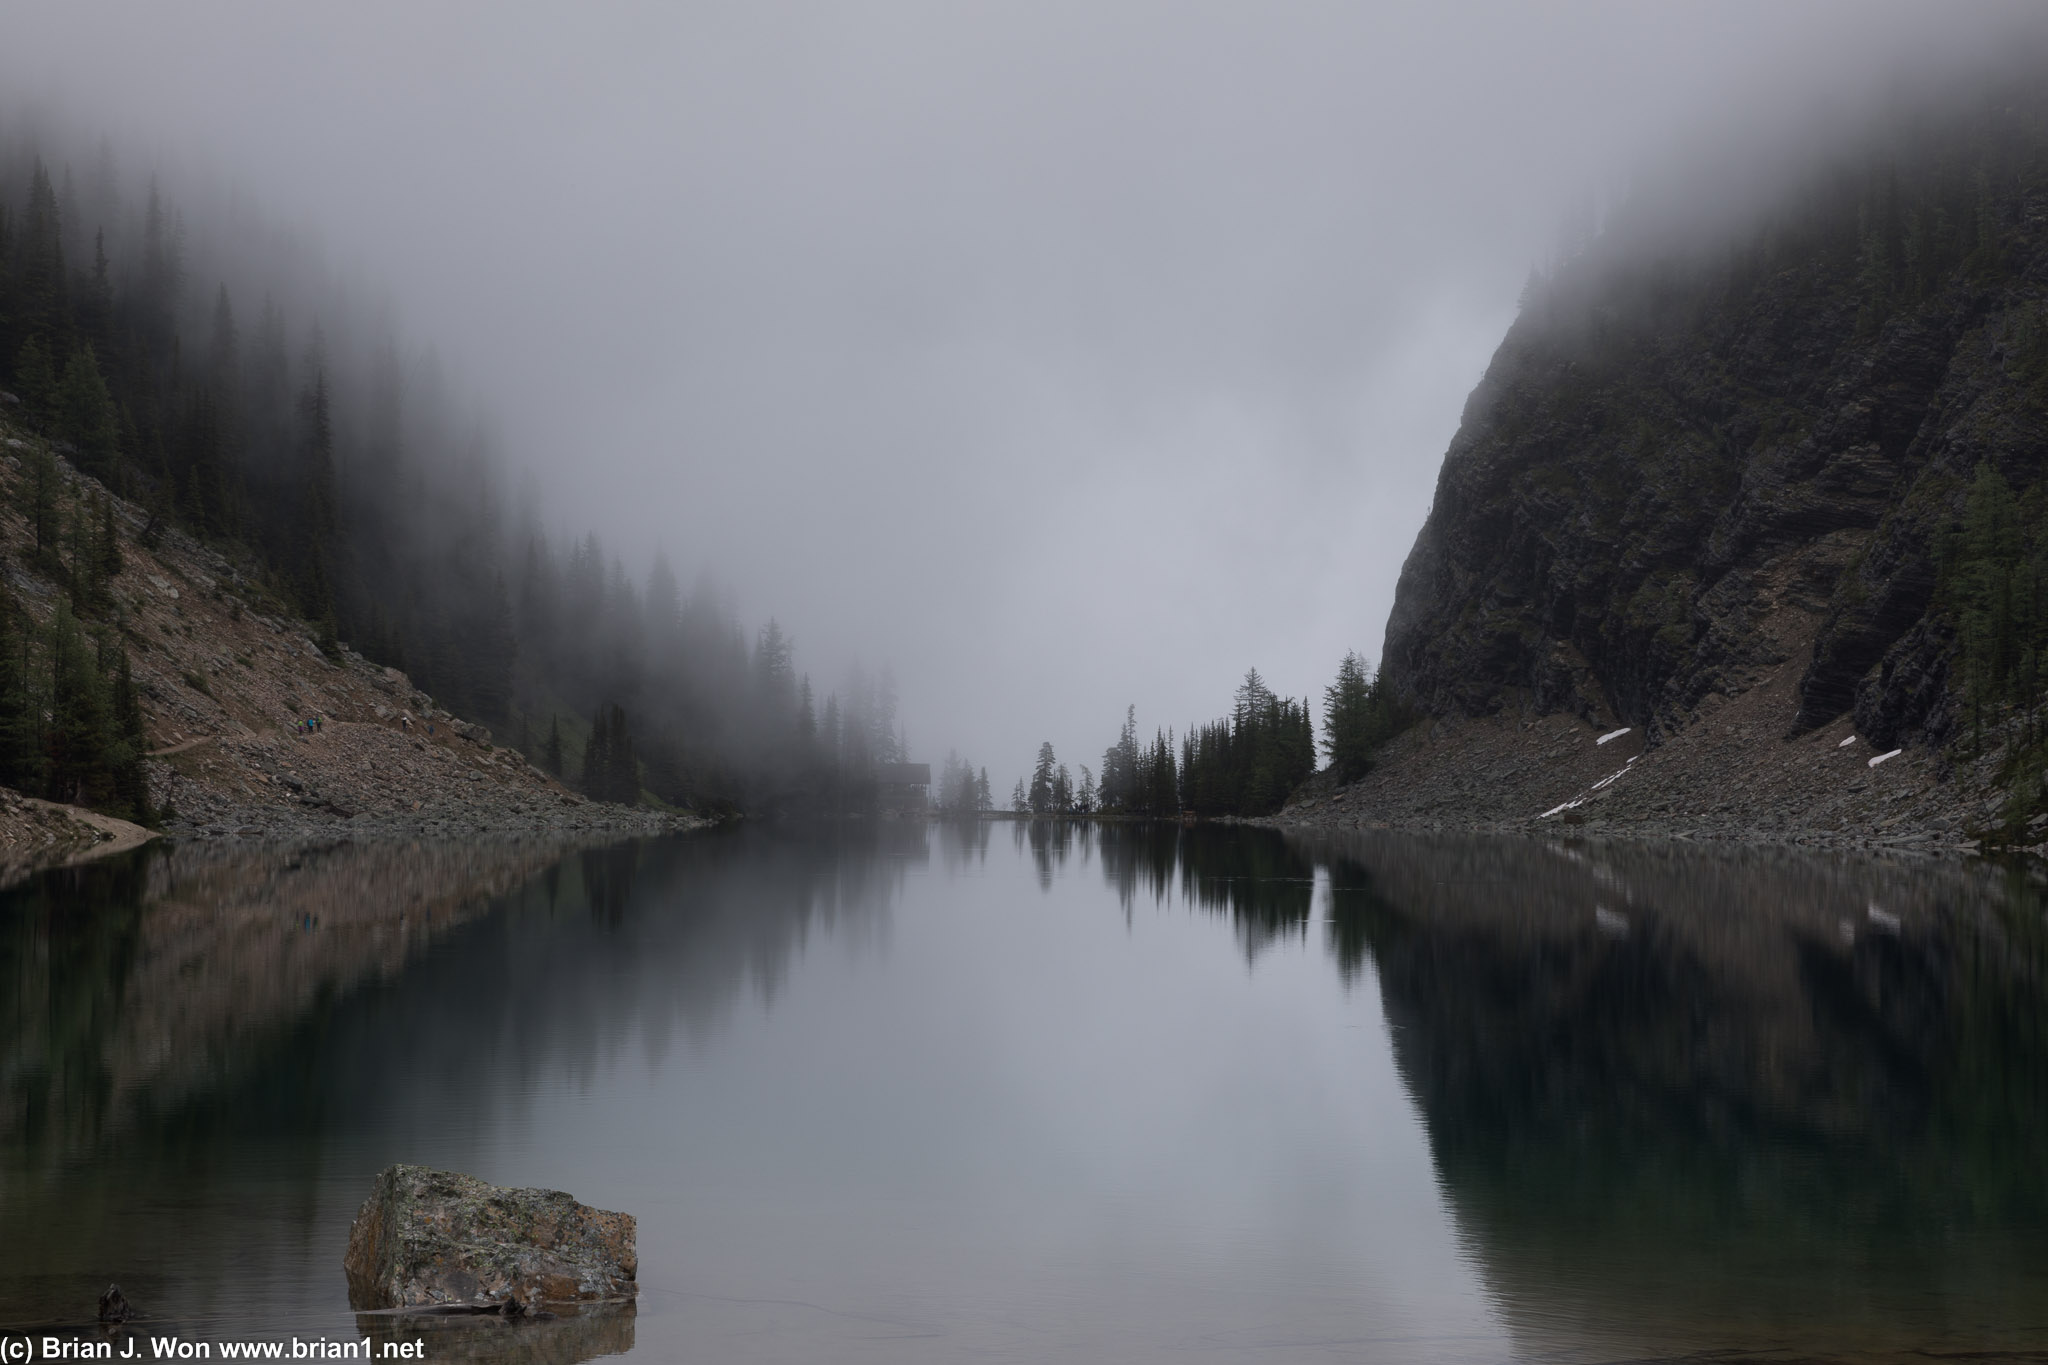 Lake Agnes tea house shrouded by clouds.